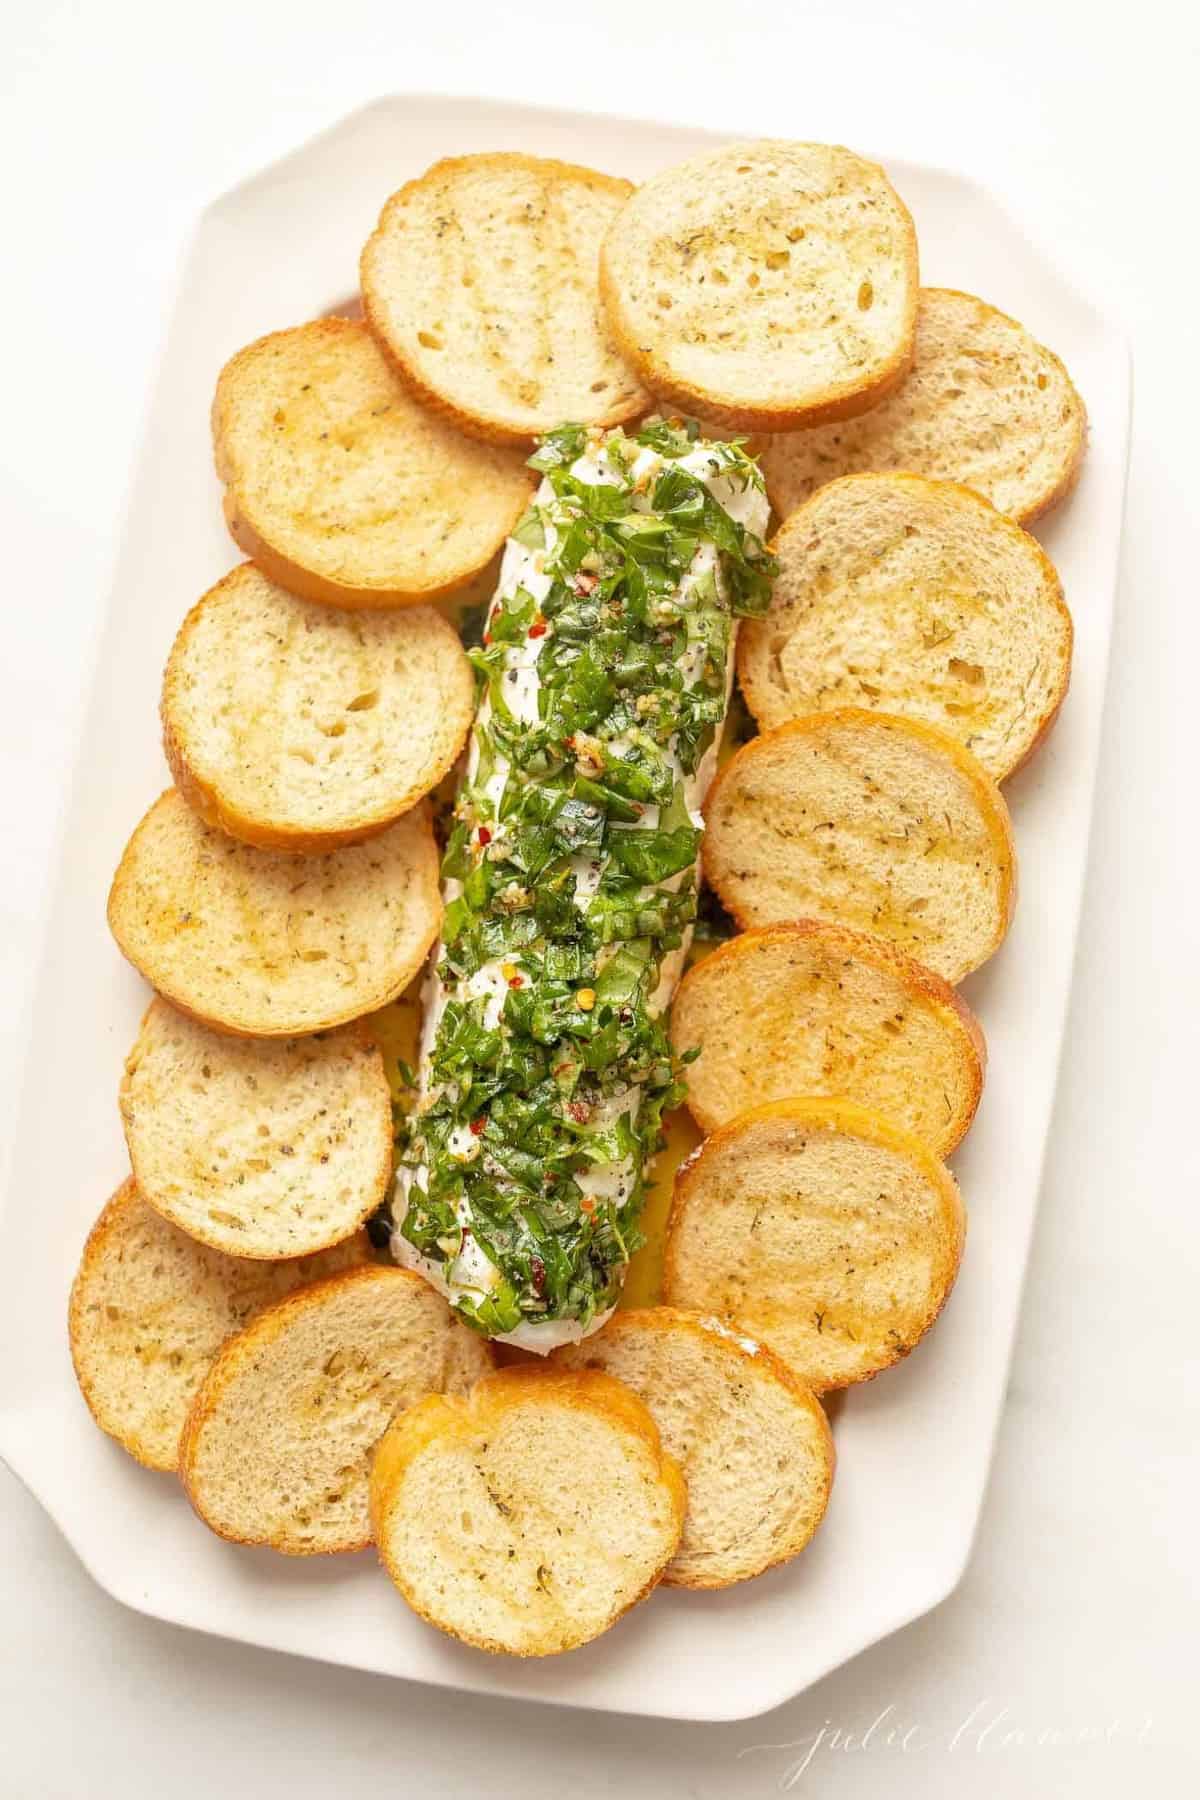 A goat cheese appetizer with a single log of chevre cheese, marinated in herbs and oil, crostini to the side.